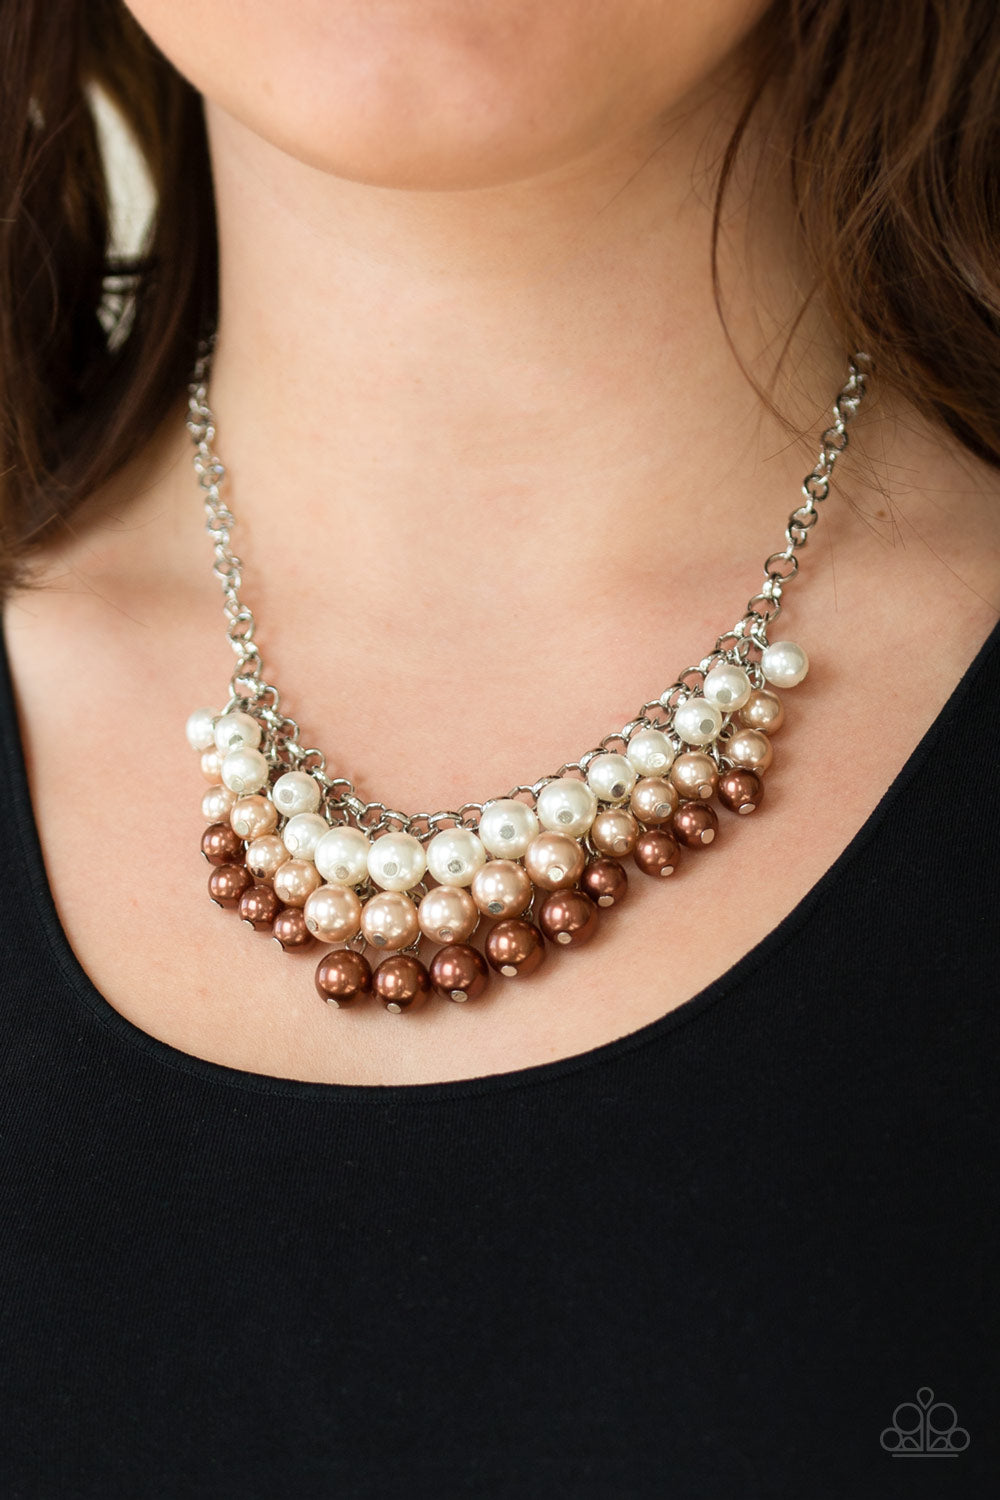 Paparazzi necklace - Run For The HEELS! - Brown